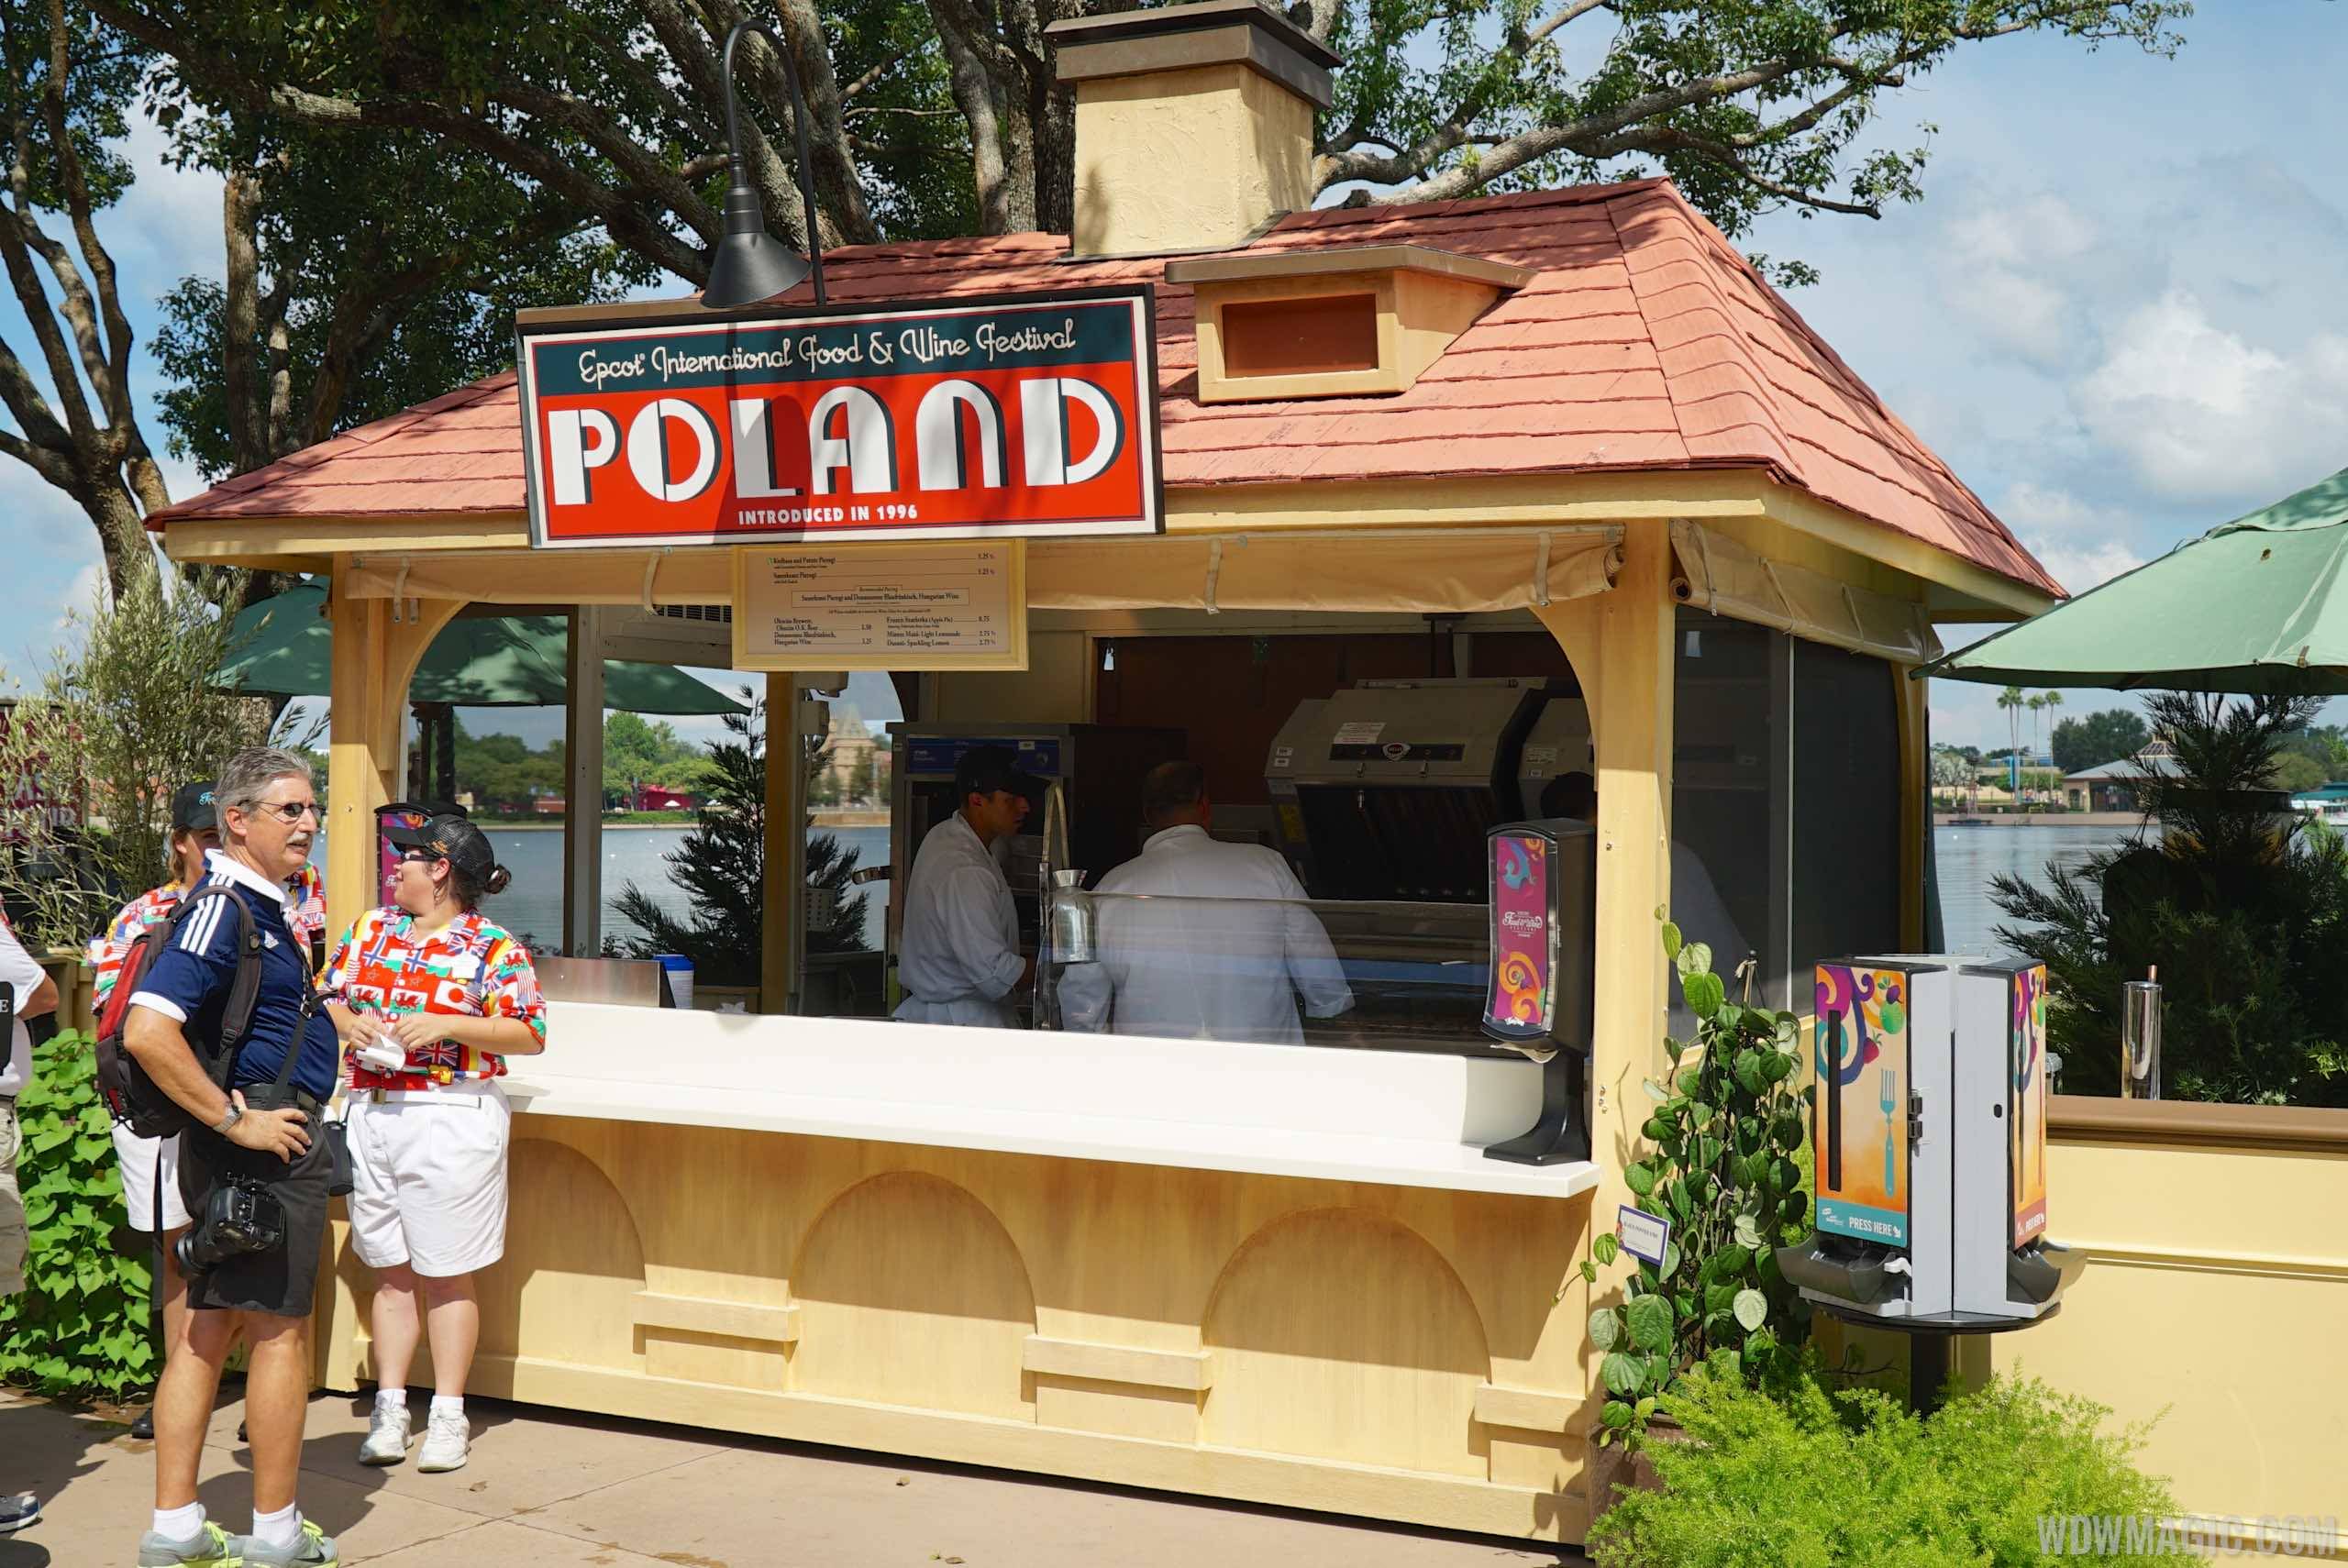 Food and Wine Festival Marketplace - Poland